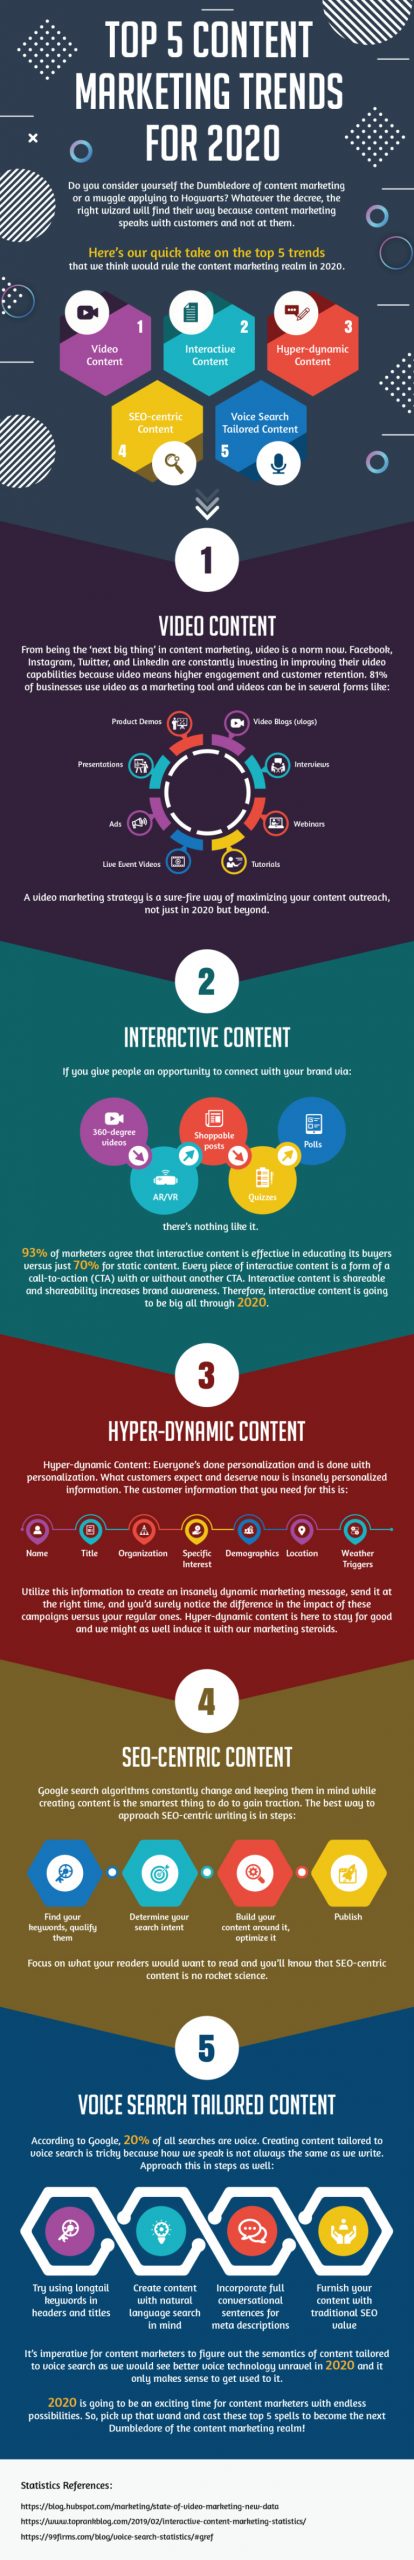 , 5 Content Marketing Trends to Help You Through the Coronavirus Chaos [Infographic], TornCRM